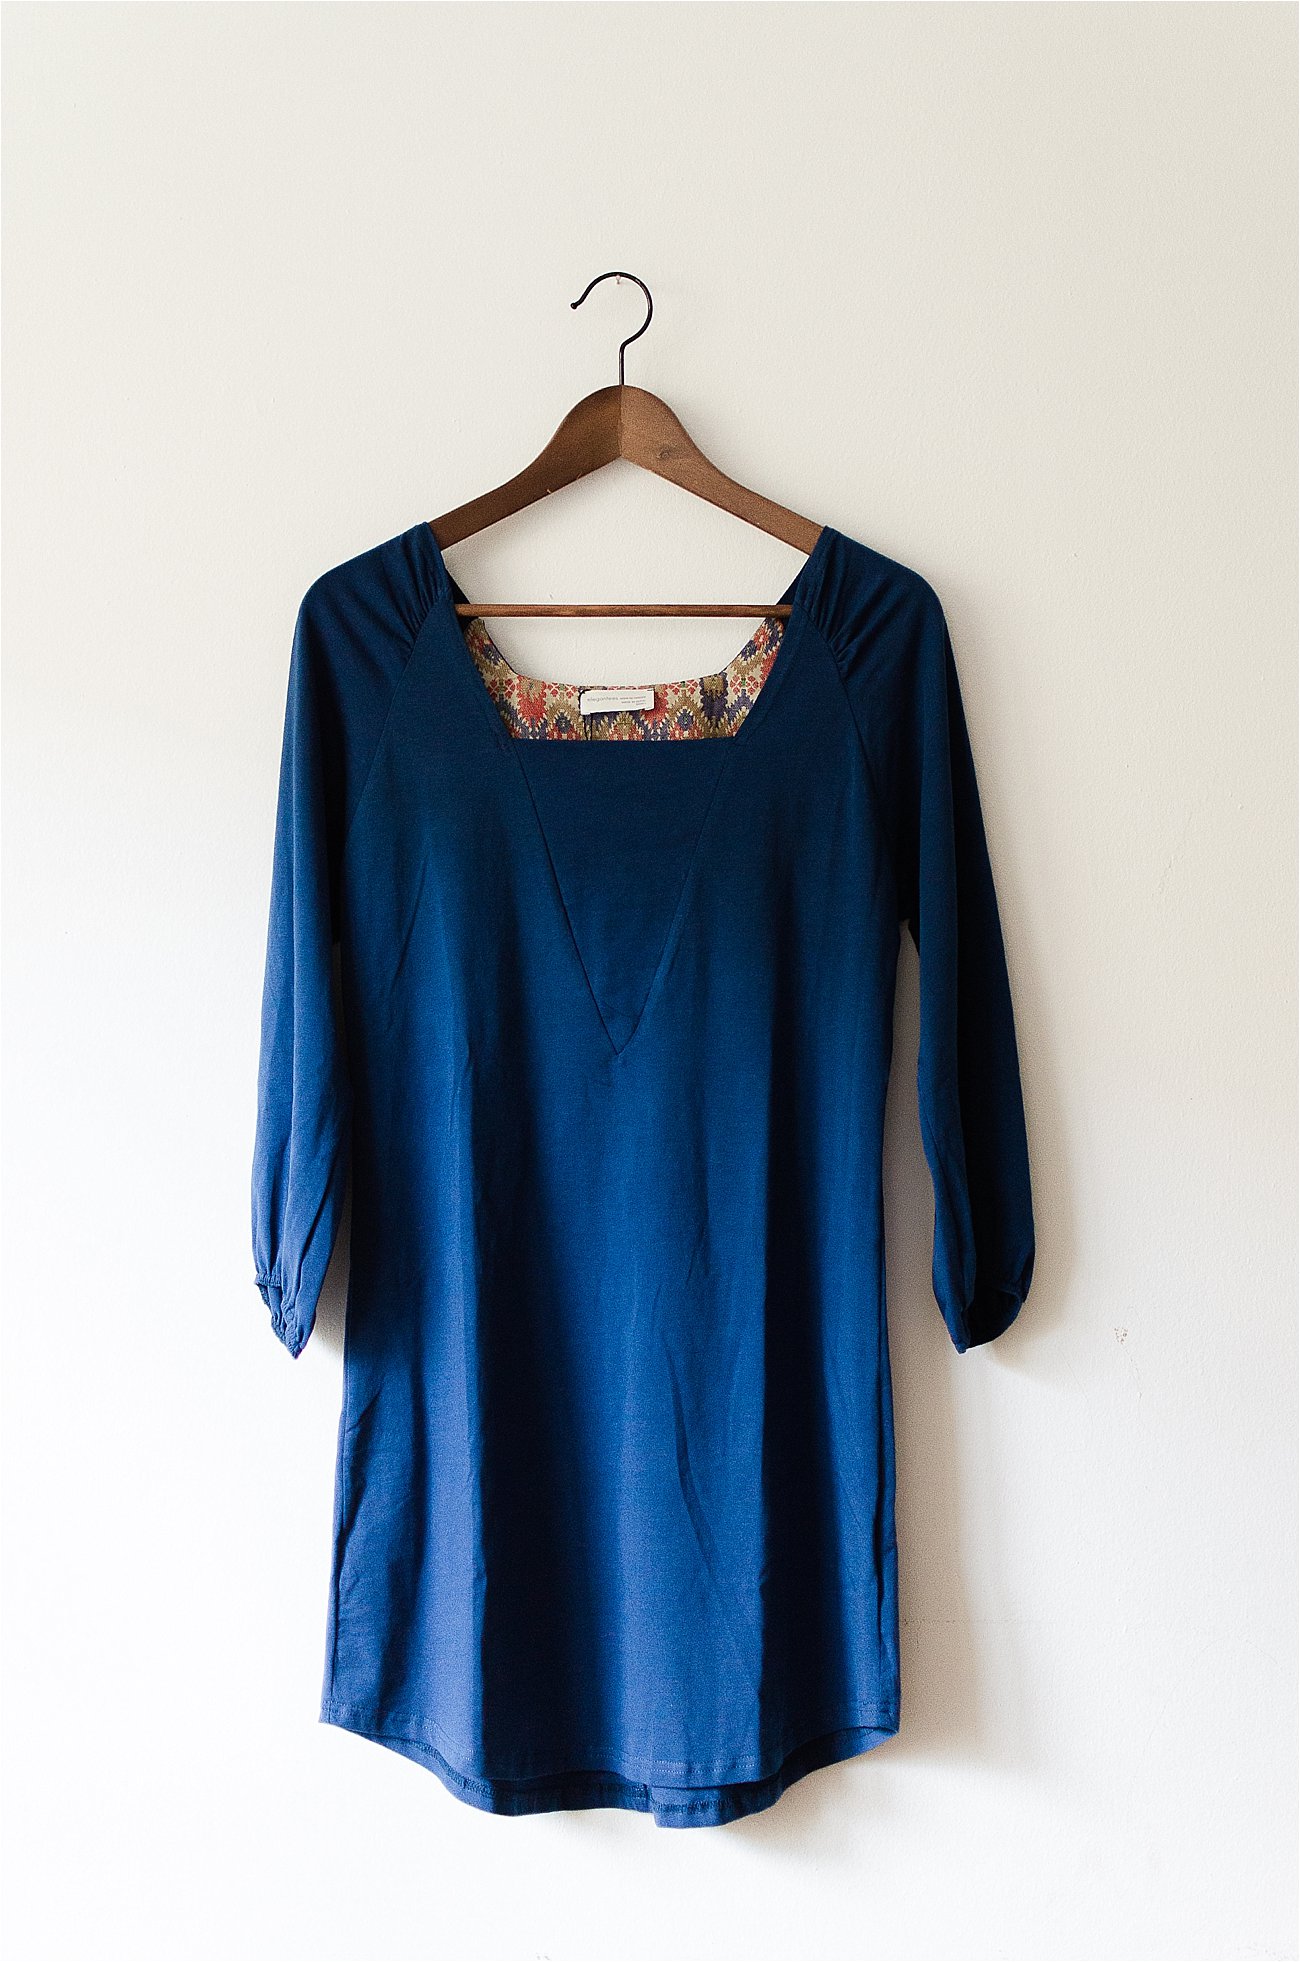 The Elegantees "Molly" Tunic in Estate Blue and Meteorite | Ethical Fashion, Ethically Made, #purchasewithpurpose #fashionforgood, Ethical Fashion Blogger (29)